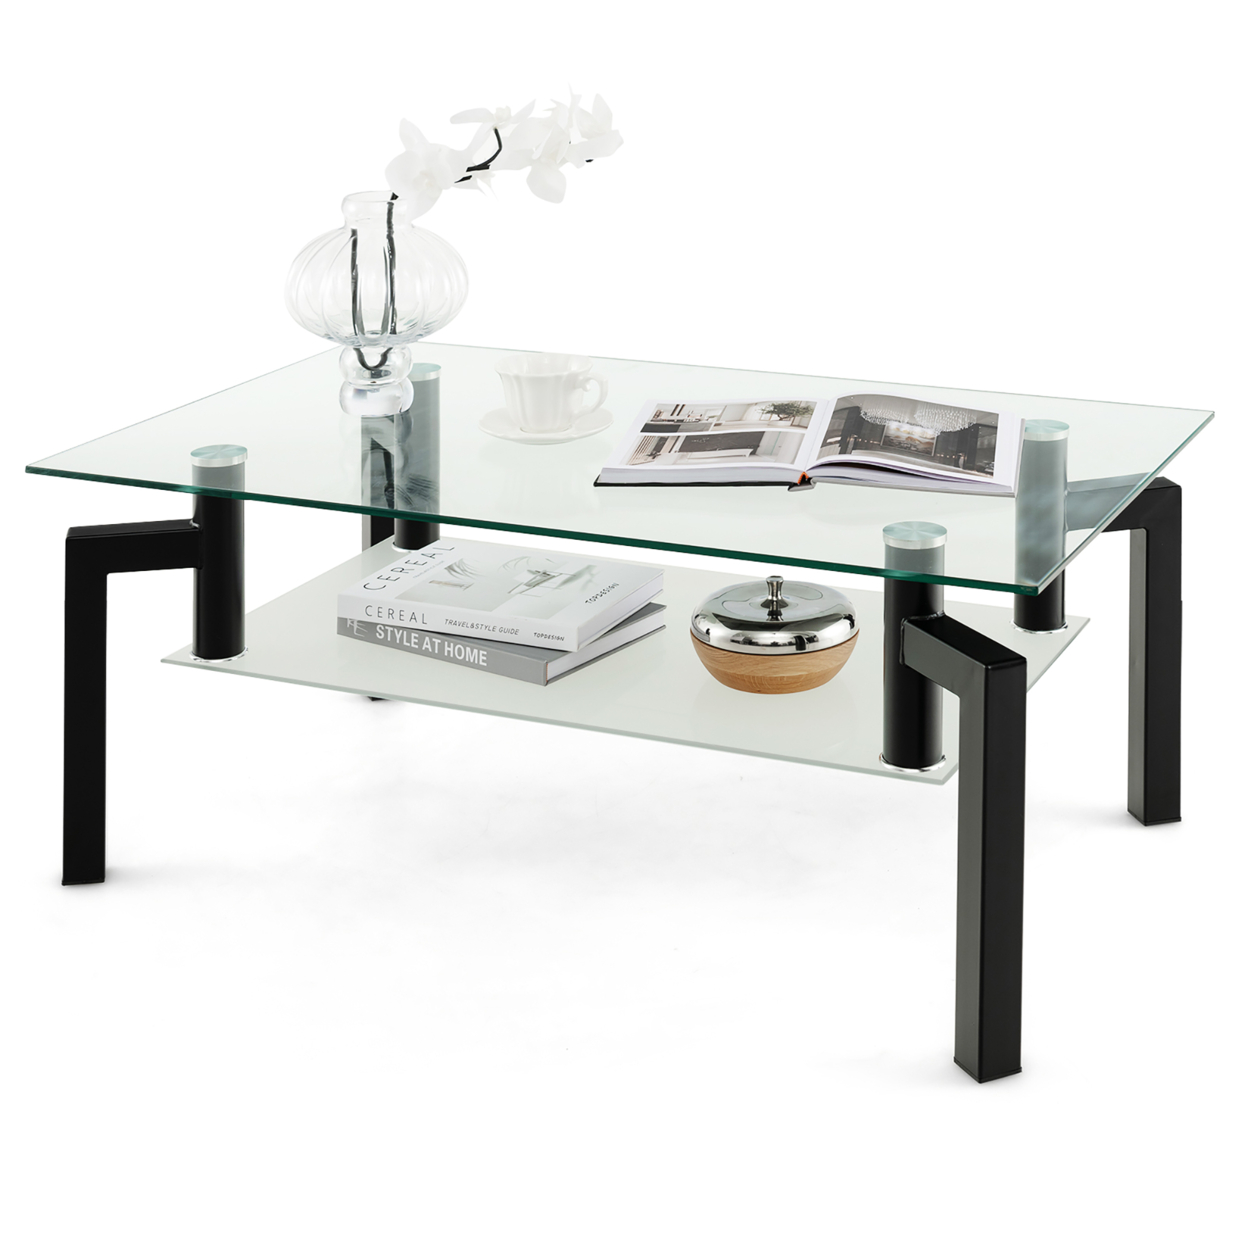 Glass Coffee Table 2-Tier Tempered Accent Table W/ Metal Tube Legs Living Room